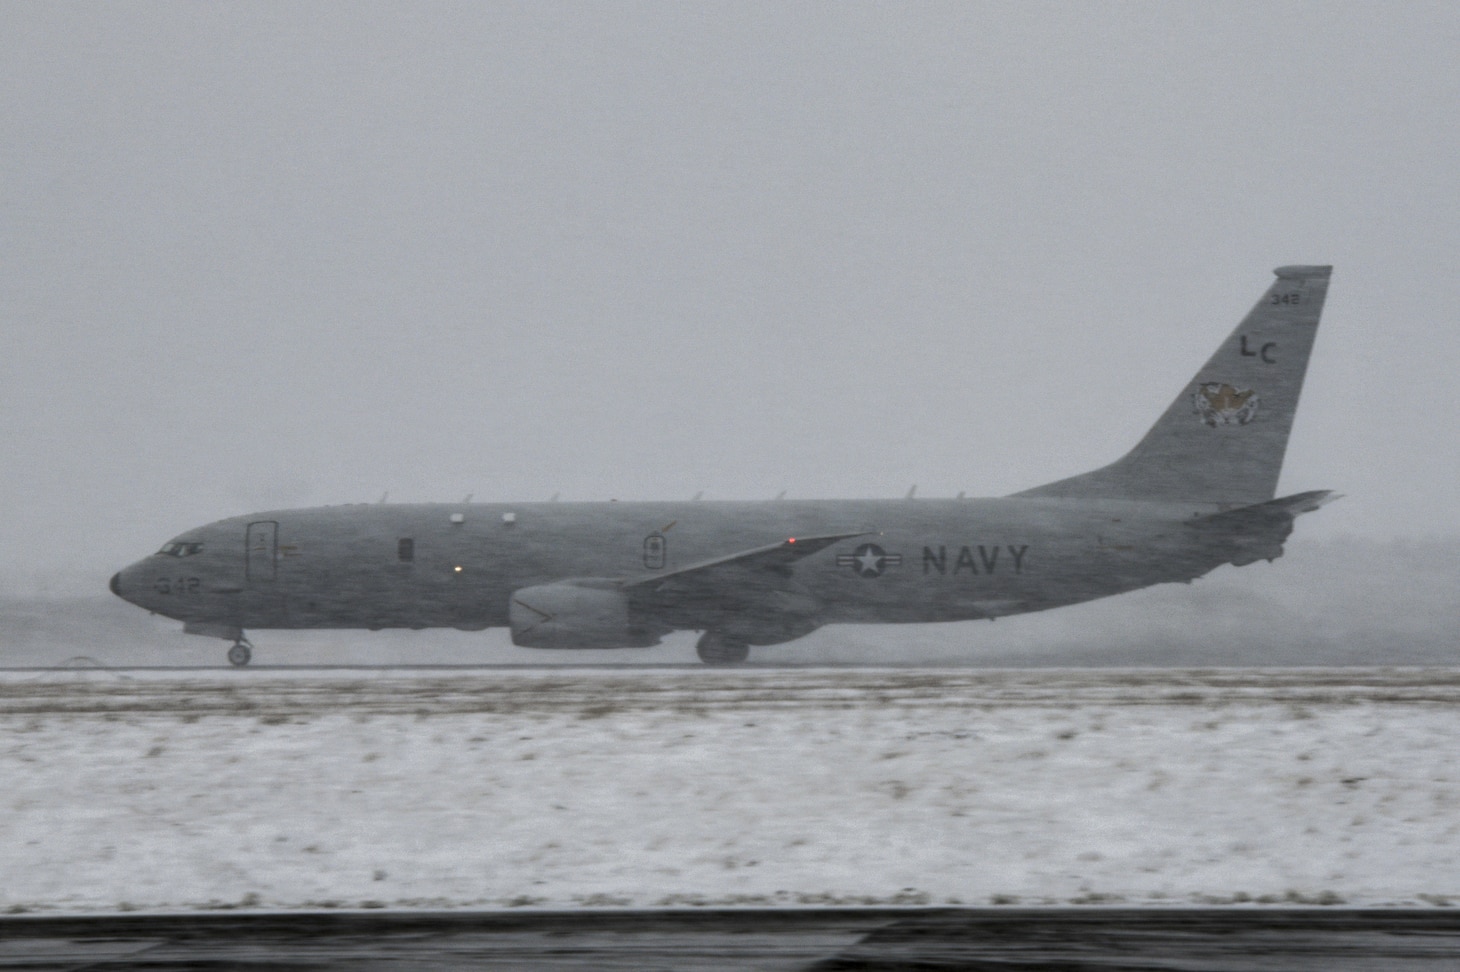 A P-8A Poseidon, assigned to the "Fighting Tigers" of Patrol Squadron (VP) 8, takes off from Misawa Air Base during a scheduled flight operation.